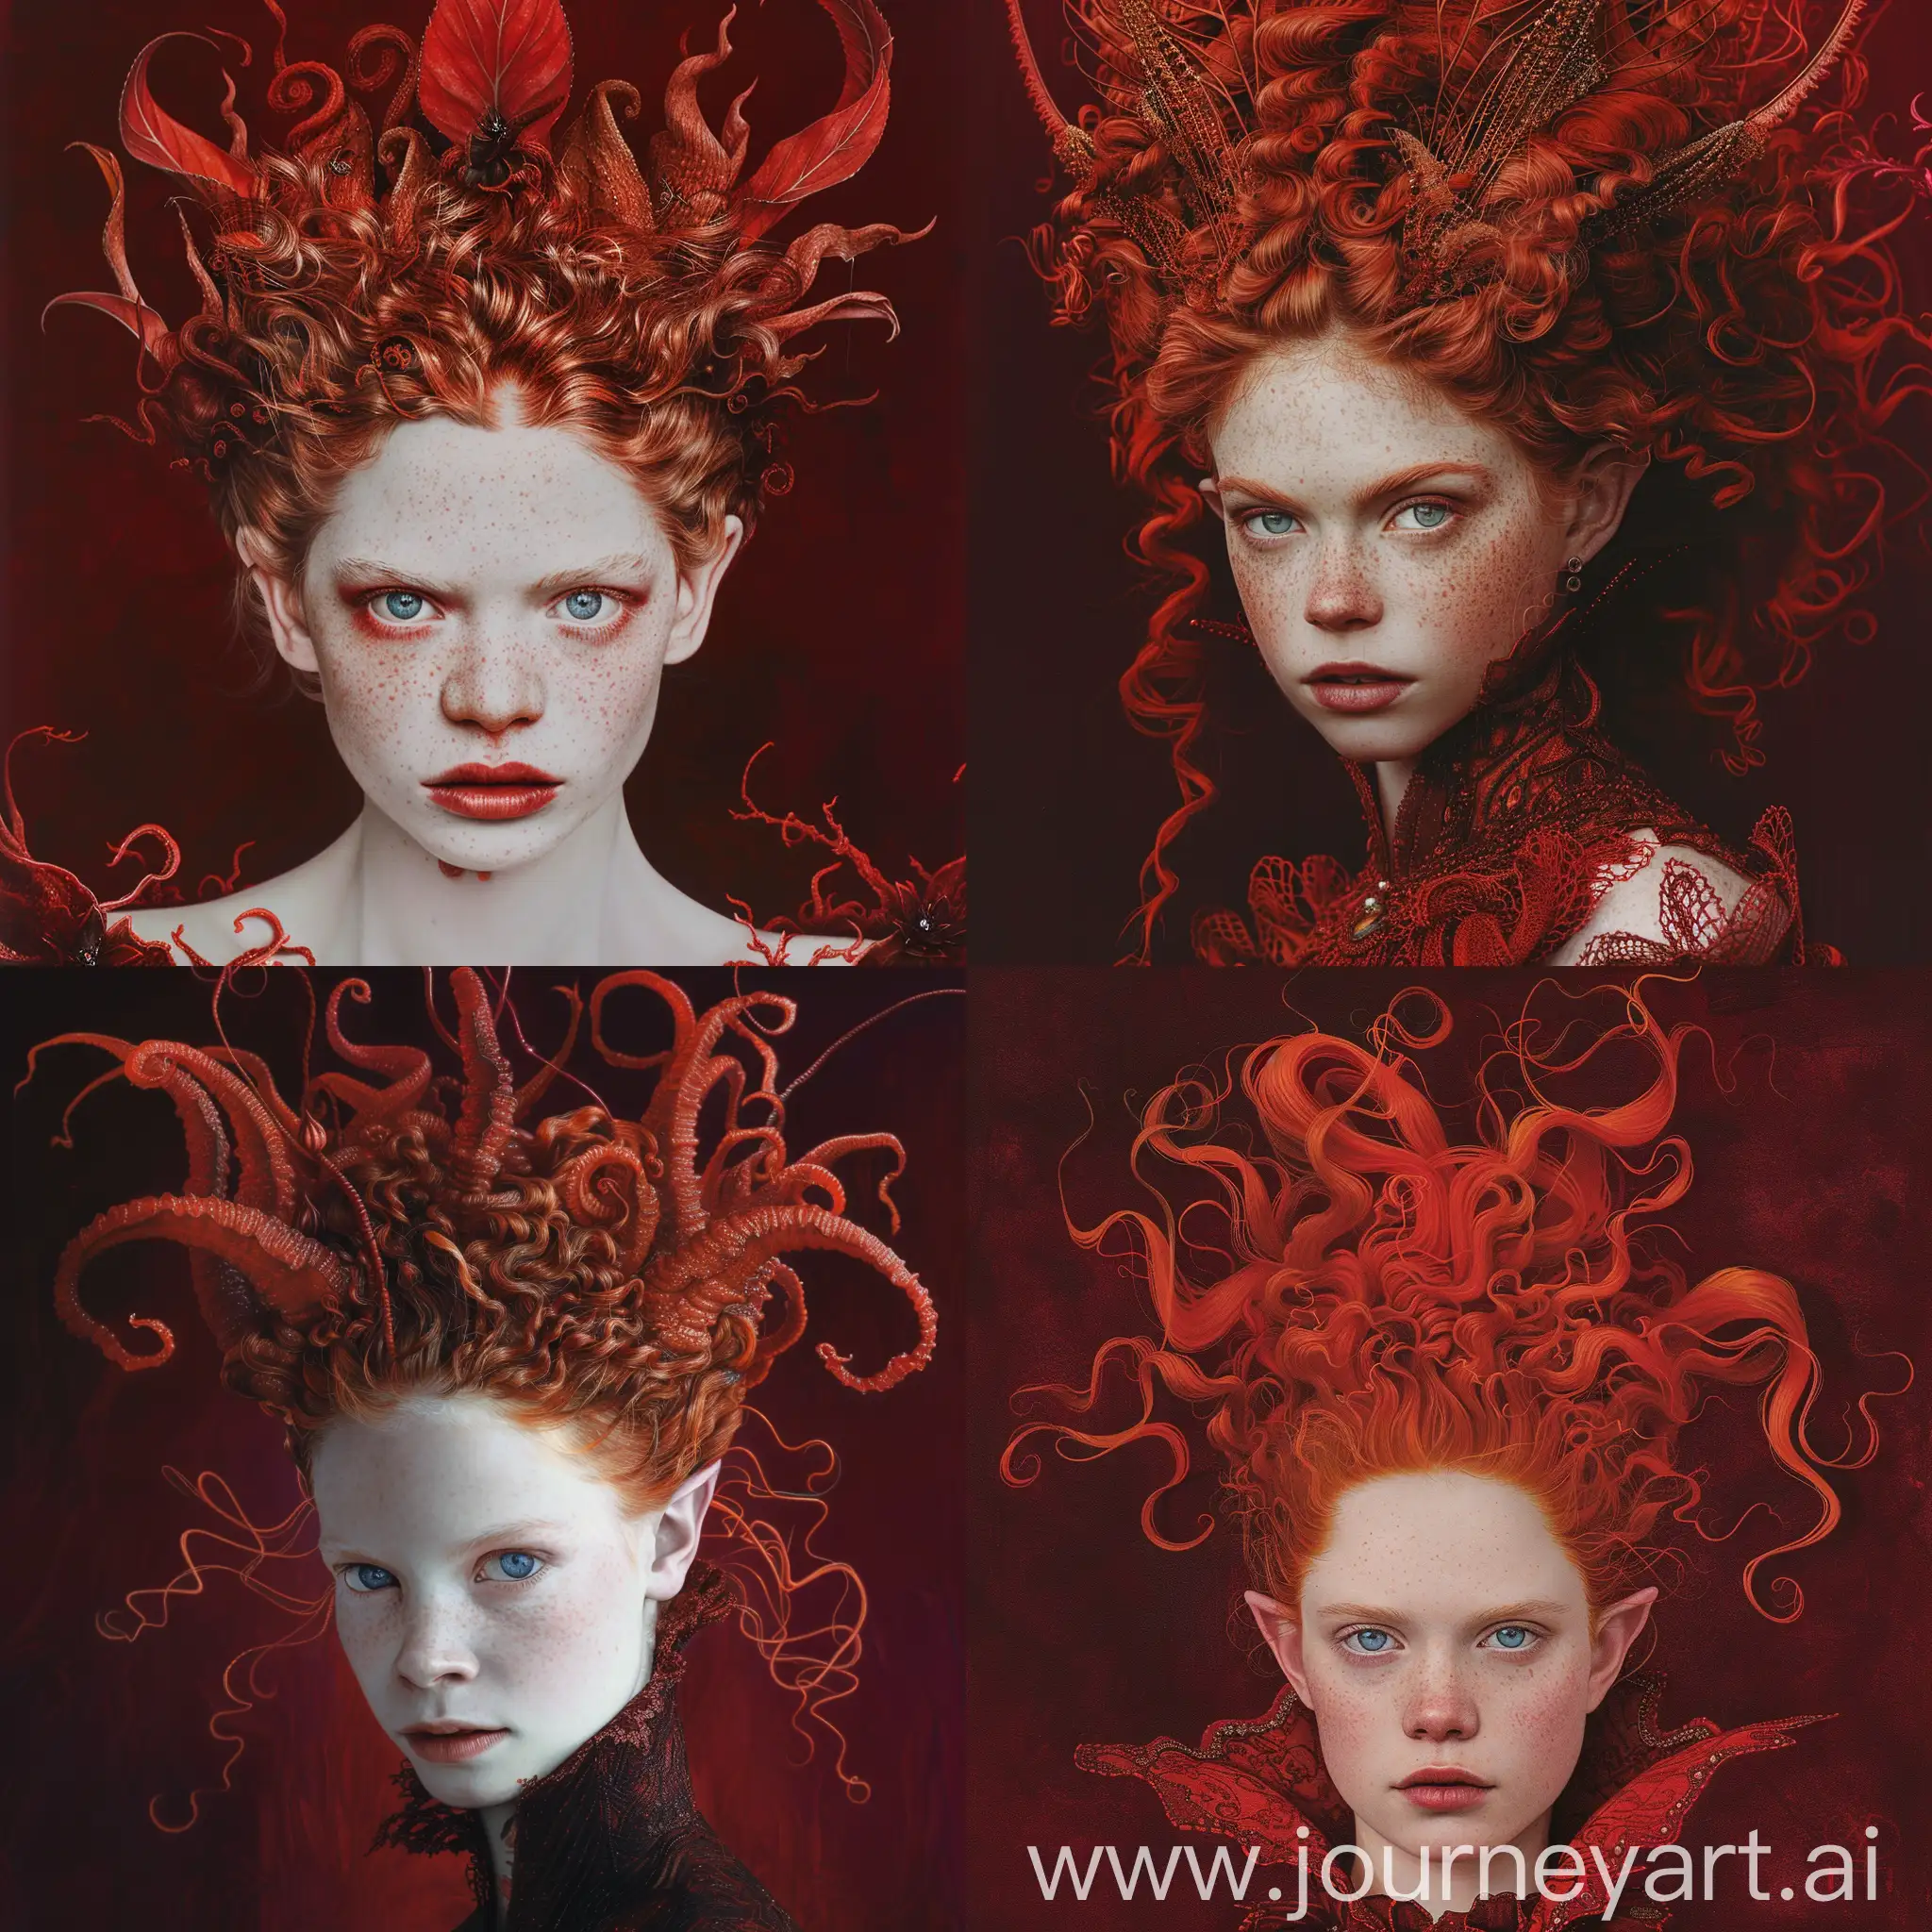 Regal-Young-Woman-Portrait-with-Fiery-Red-Curls-in-Crimson-Background